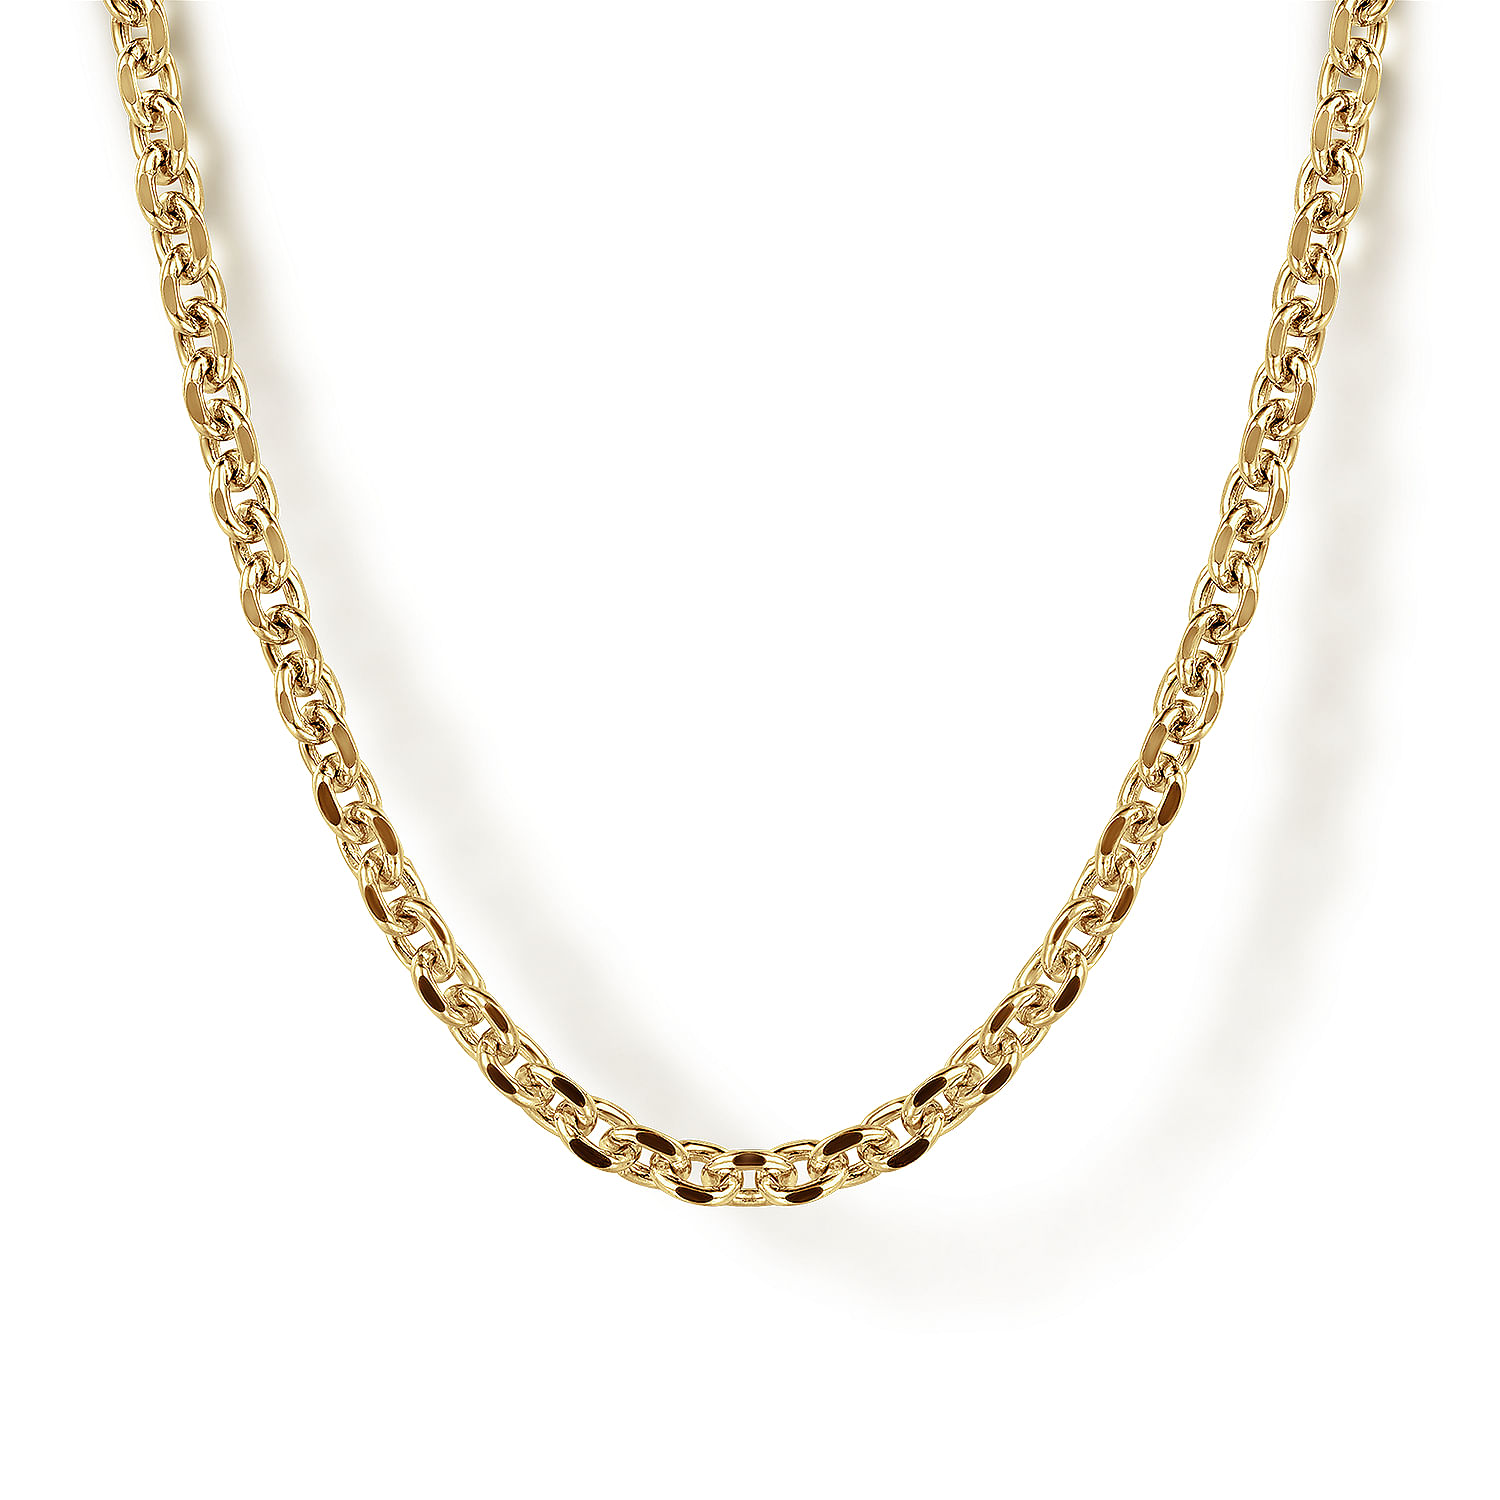 20 Inch 14K Yellow Gold Hollow Men's Link Chain Necklace